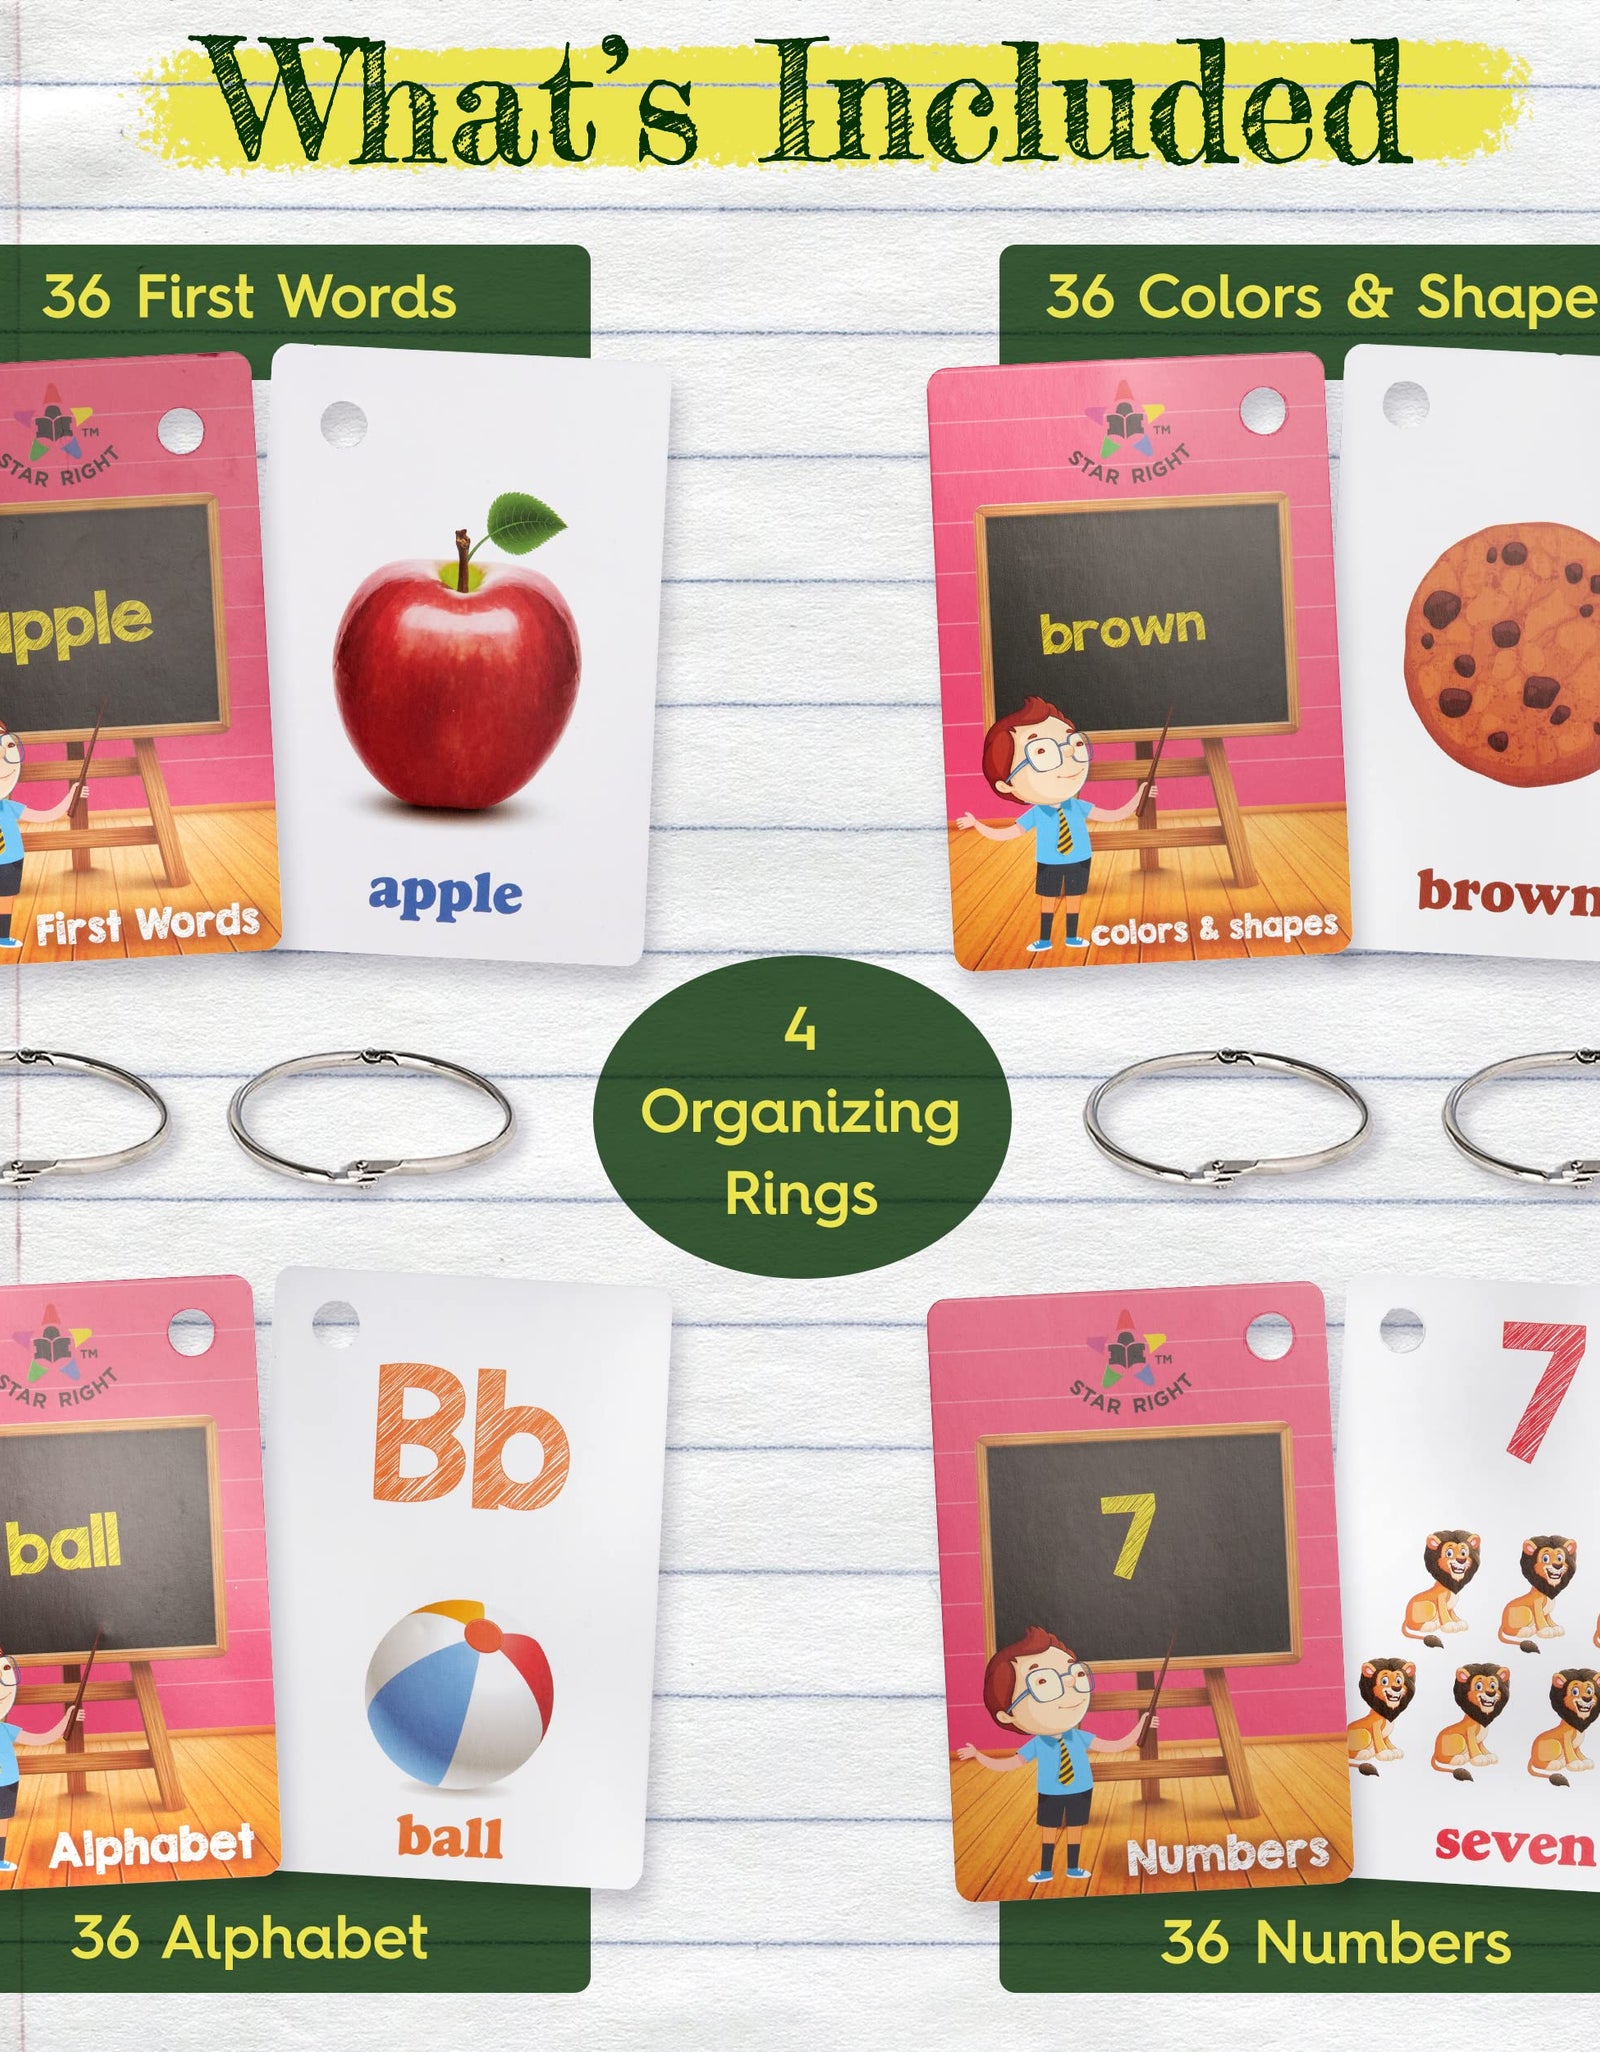 Star Right Numbers & Sight Words Flash Cards Set of 4 - Numbers, First Words, Colors, Shapes, and Alphabet Flashcards - 4 Binder Rings - 144 Sight Words Flash Cards Kindergarten & Toddlers 2-4 Years